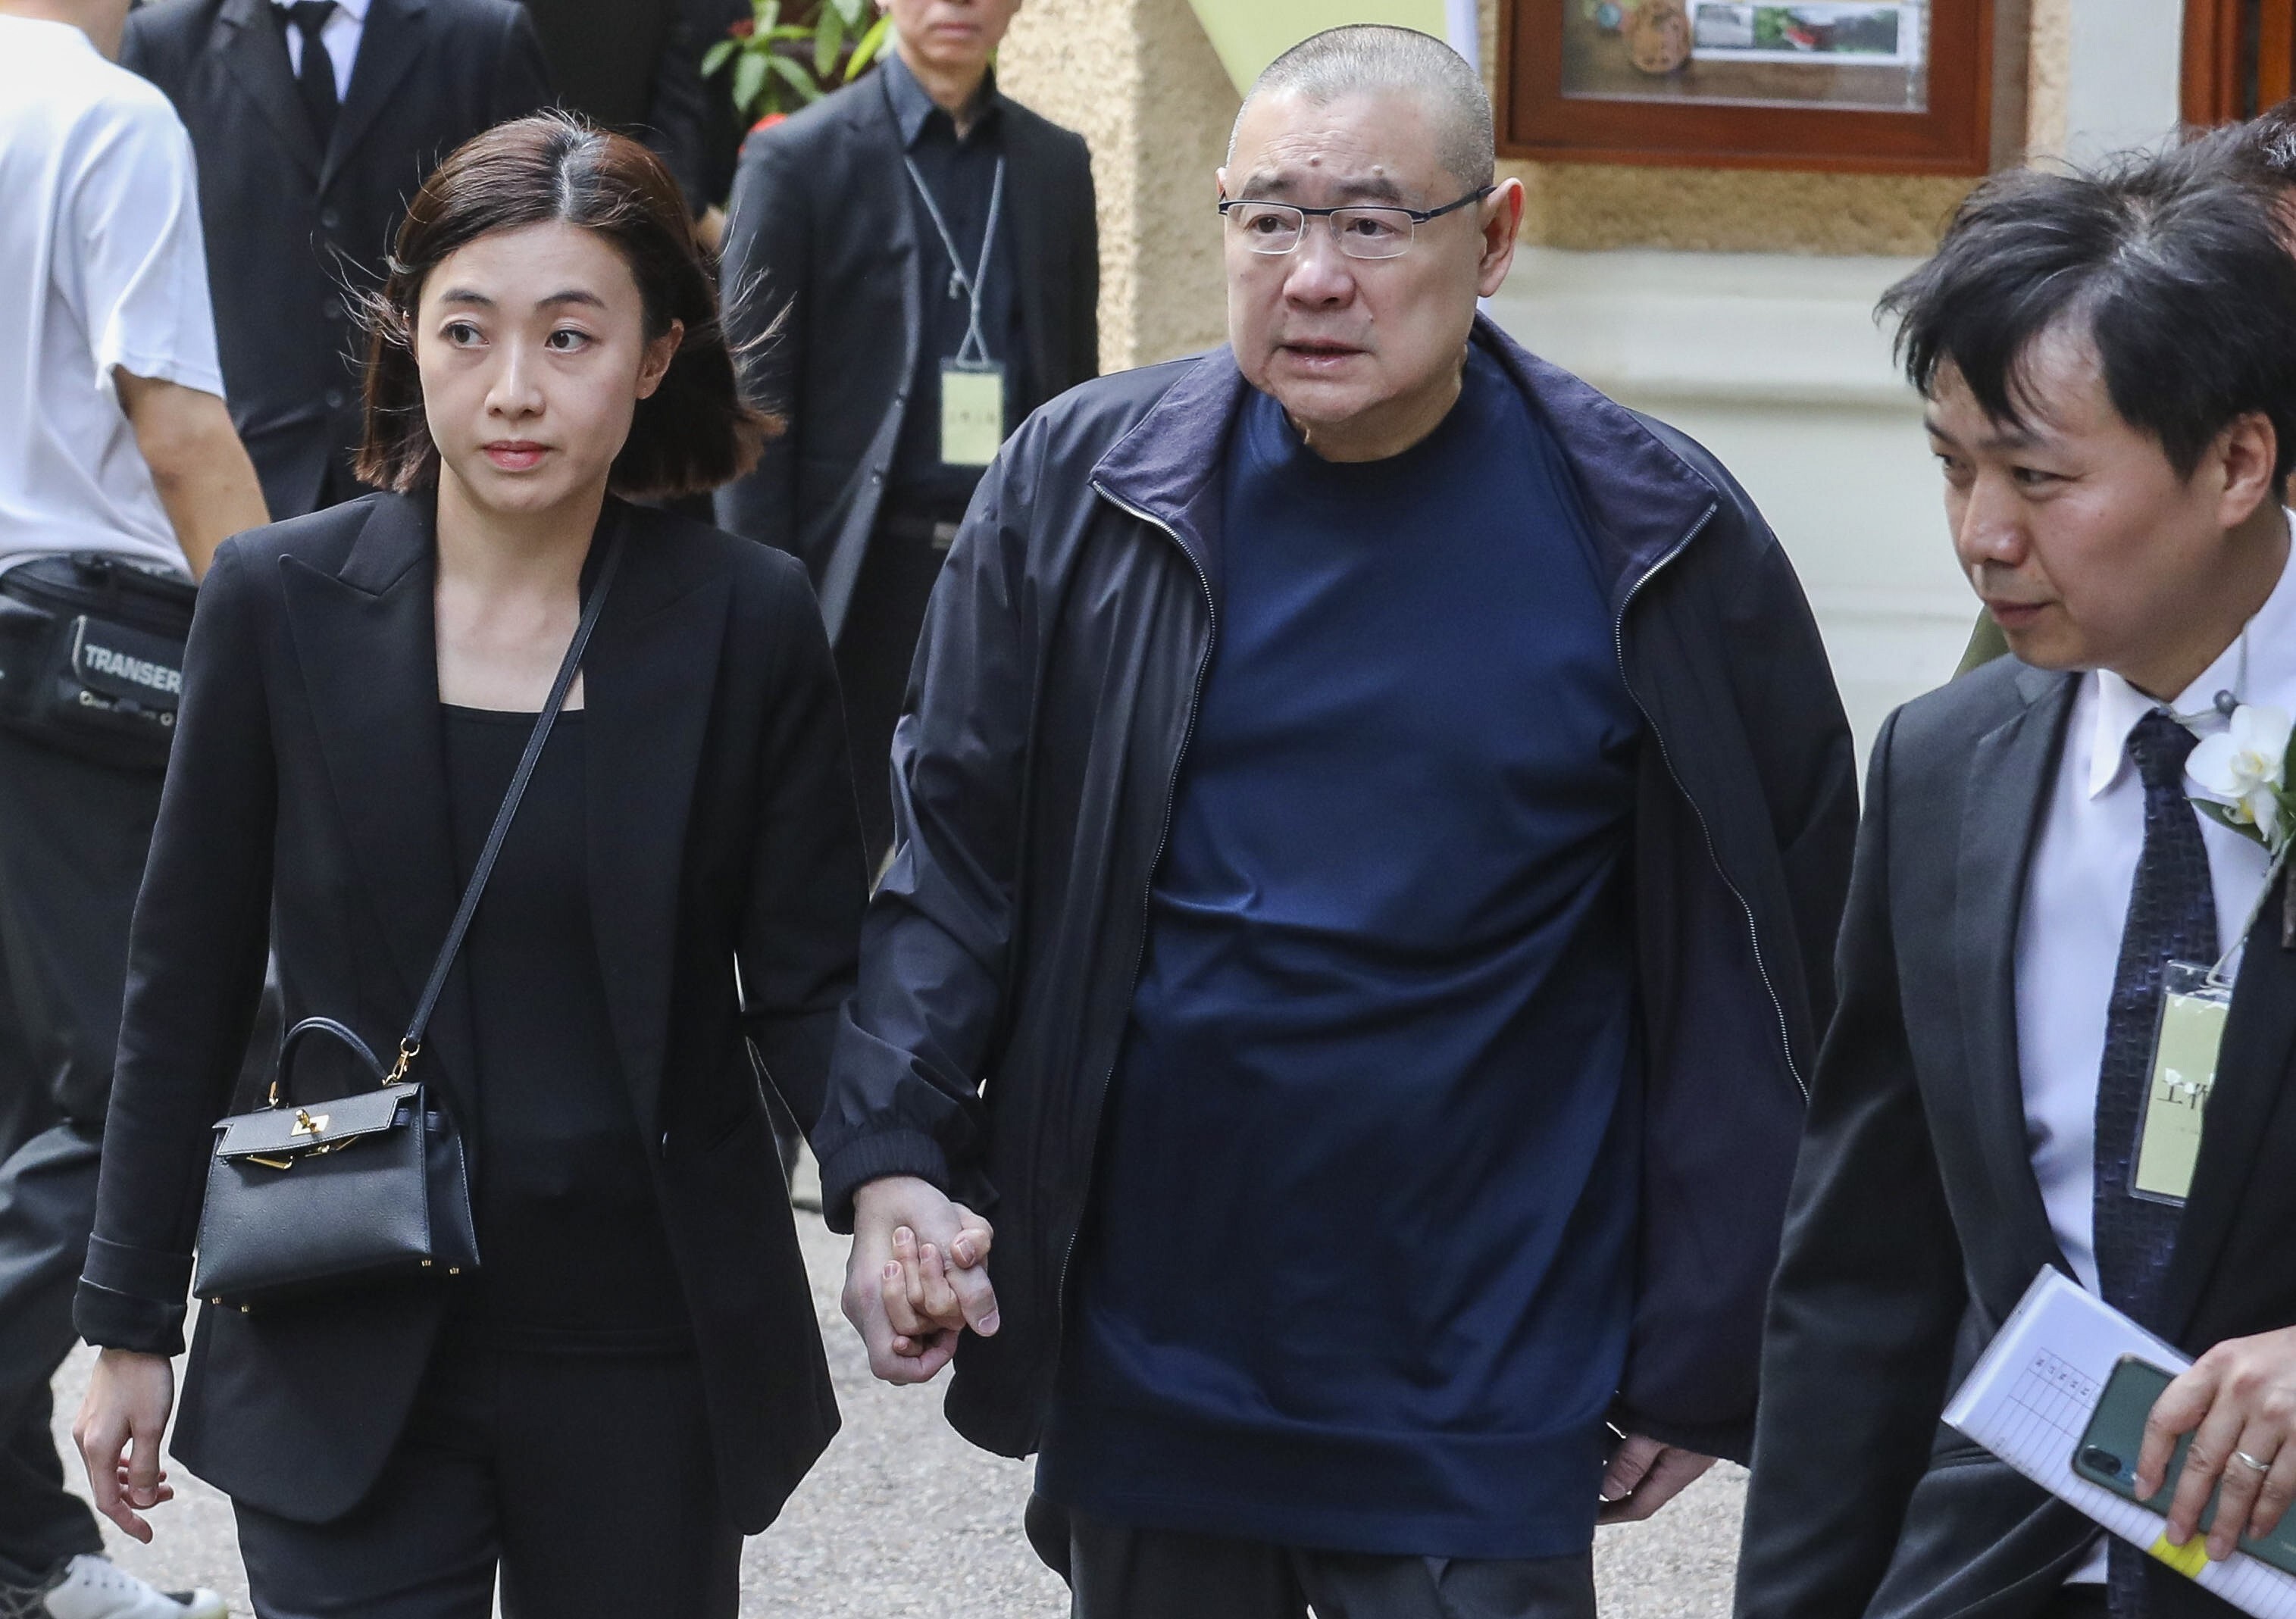 Joseph Lau Luen-hung (right) and his wife Chan Hoi-wan (left) at the funeral service of the real estate tycoon Walter Kwok Ping-sheung, at St. John’s Cathedral in Central on 1 November 2018. Photo: Felix Wong.